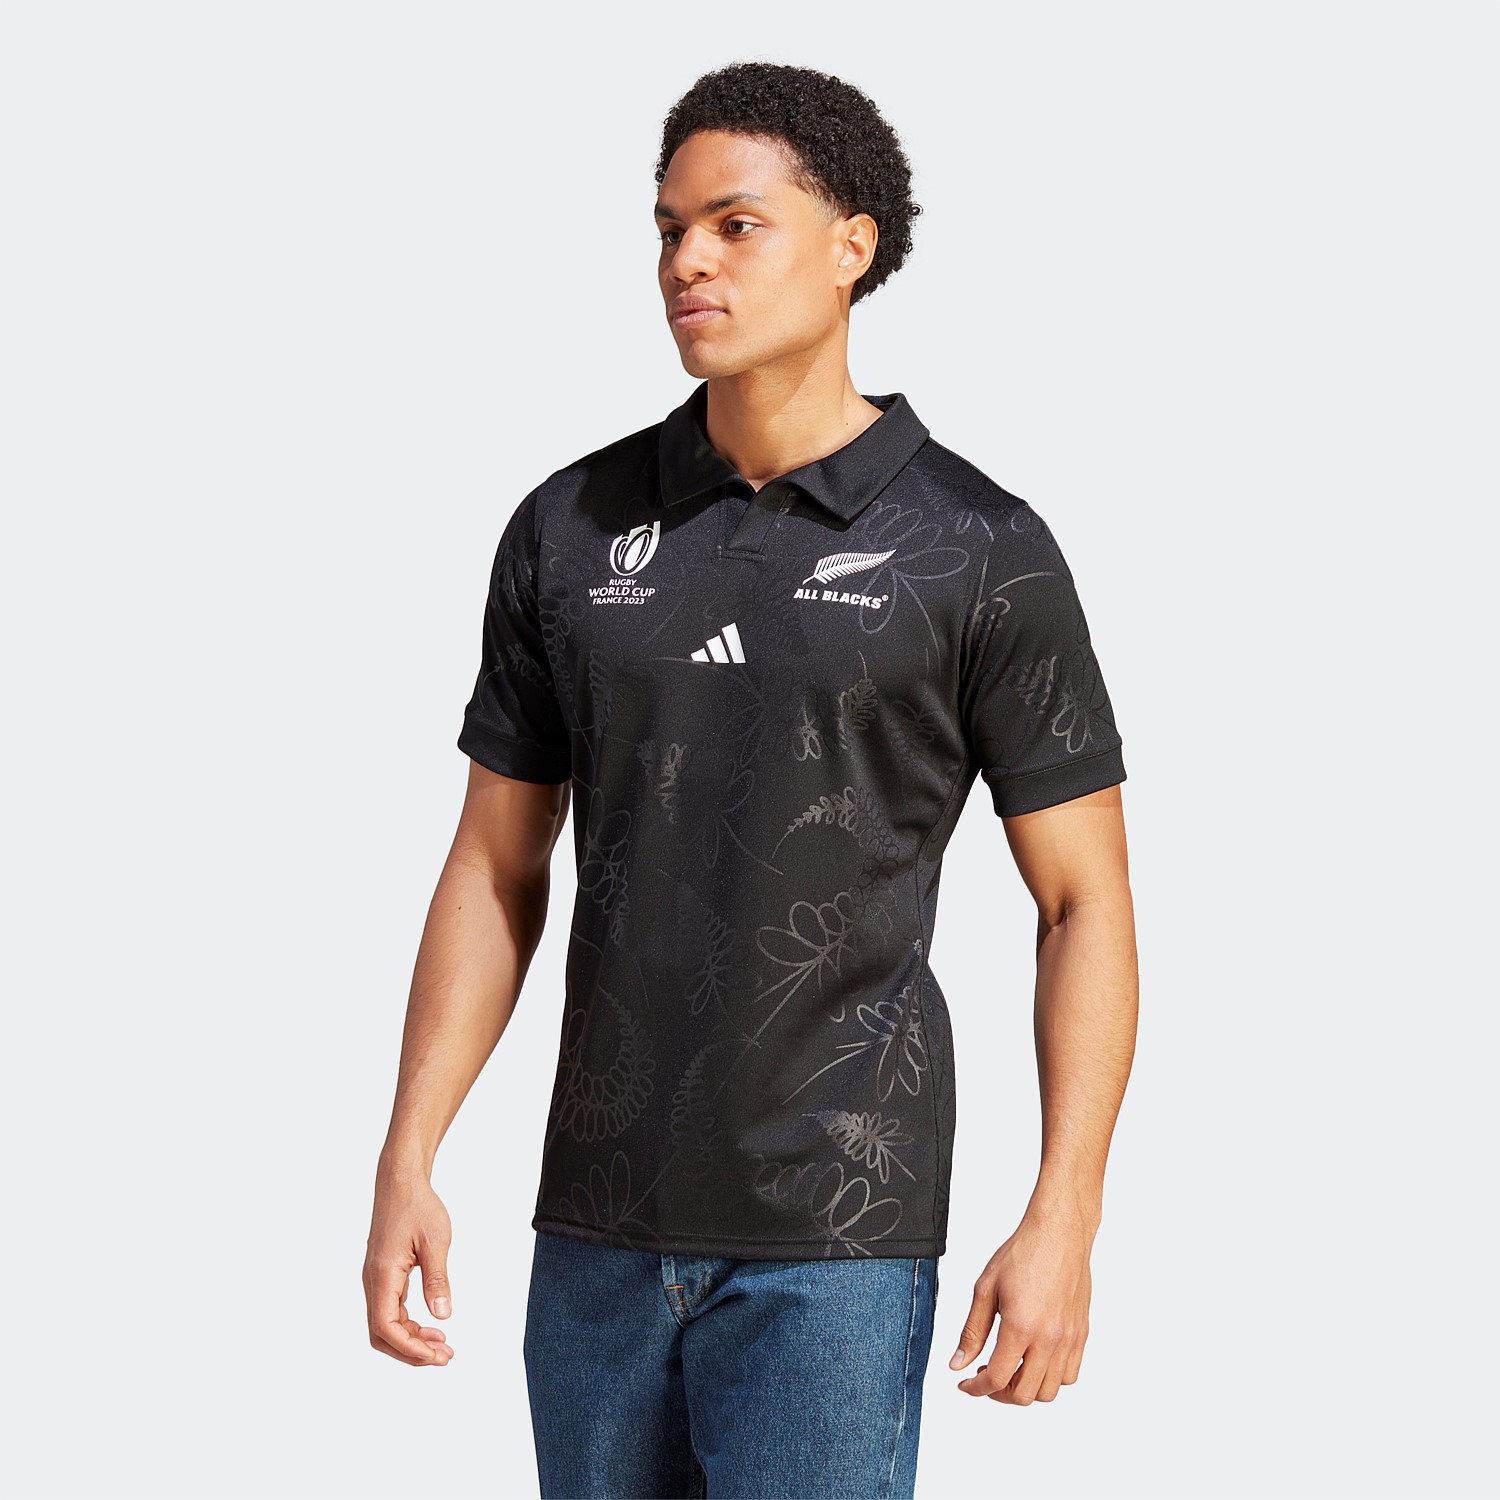 All Blacks Rugby Home Jersey | Rugby | Stirling Sports